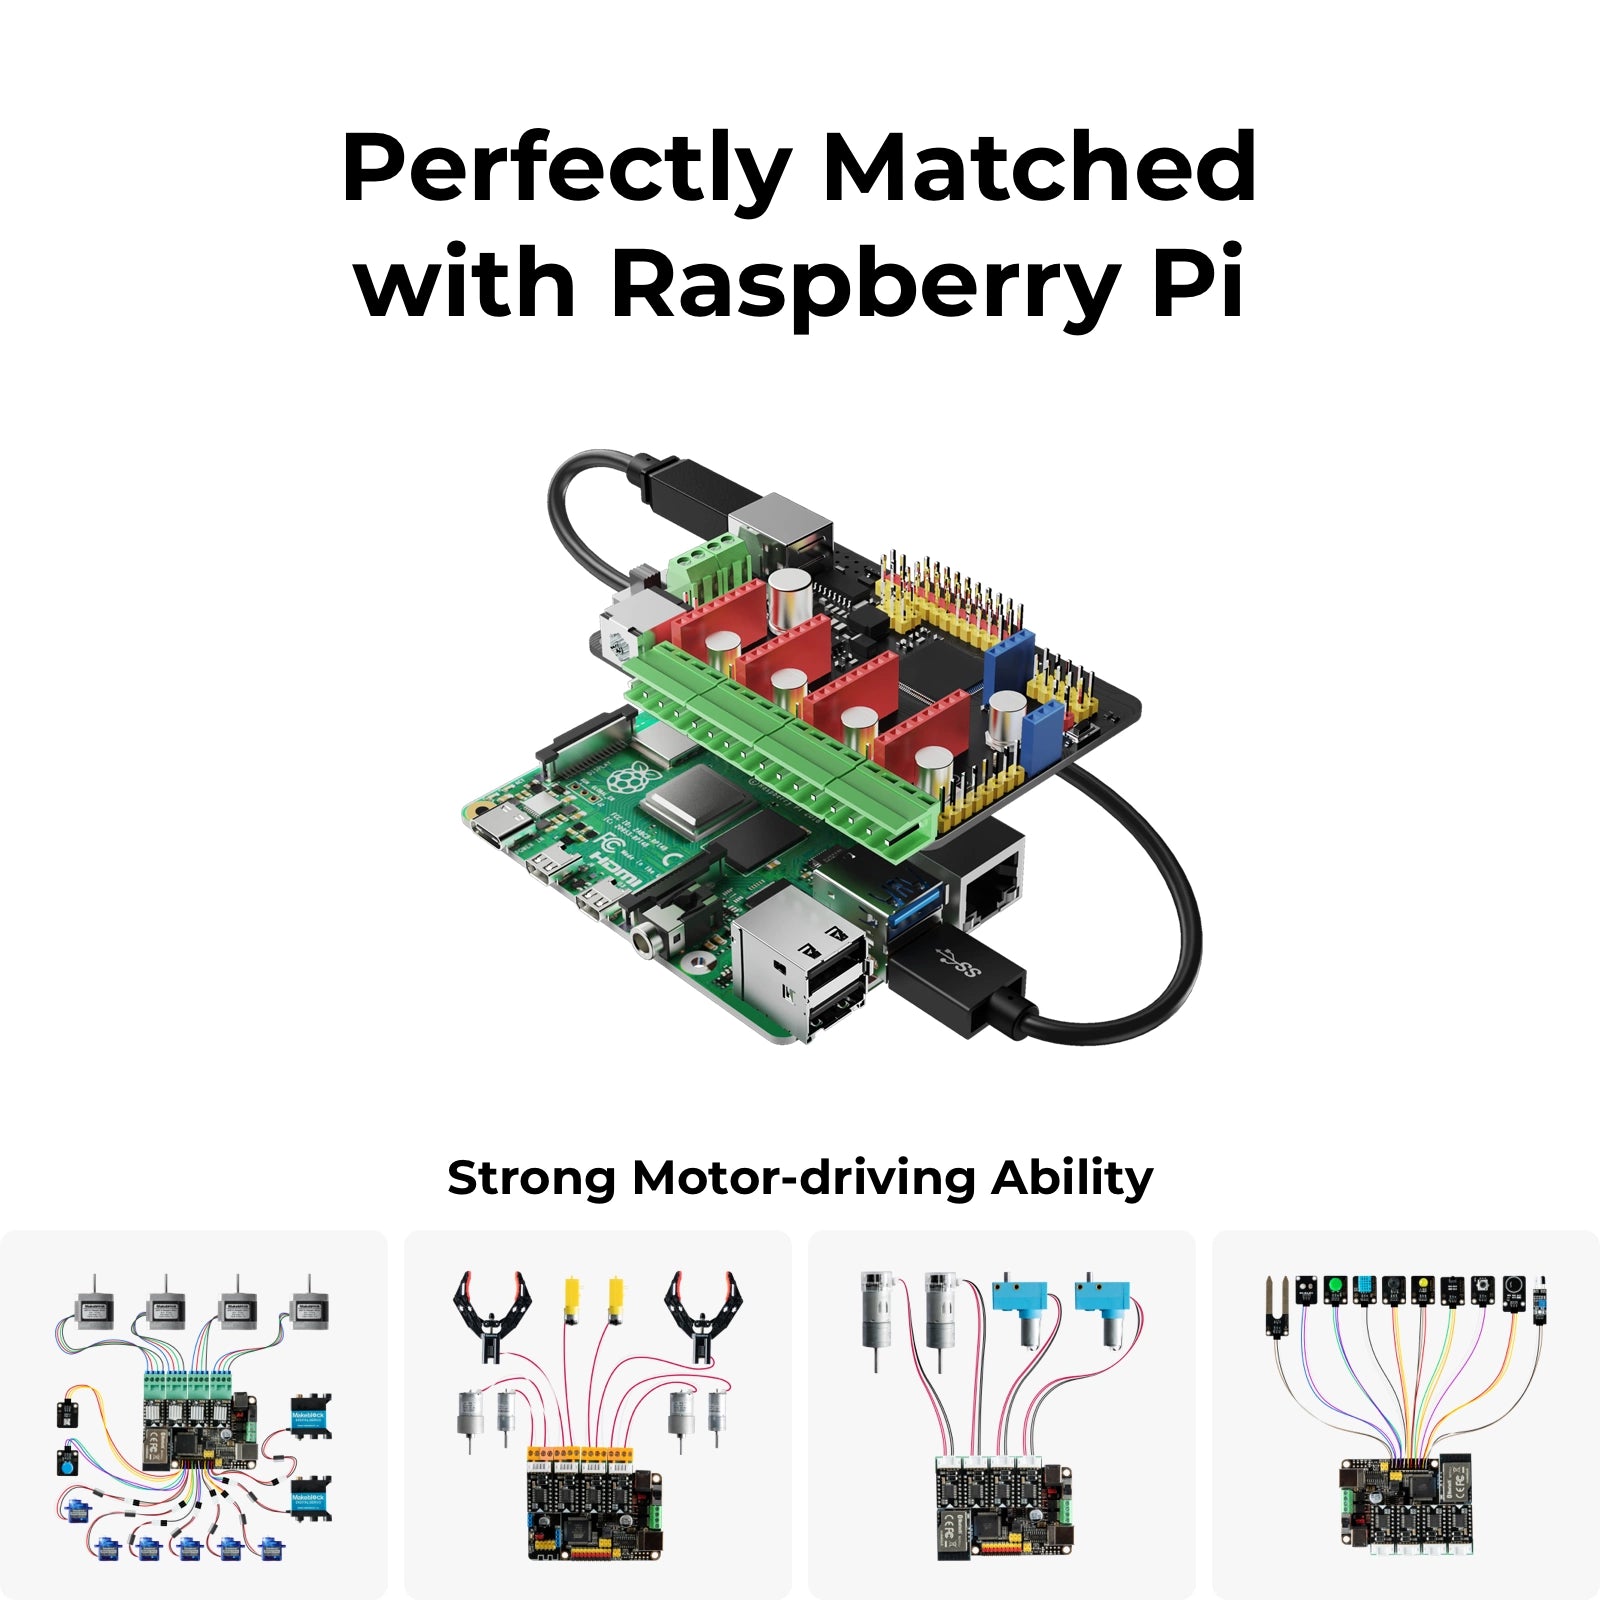 compatible with raspberry pi for robotics projects and python coding